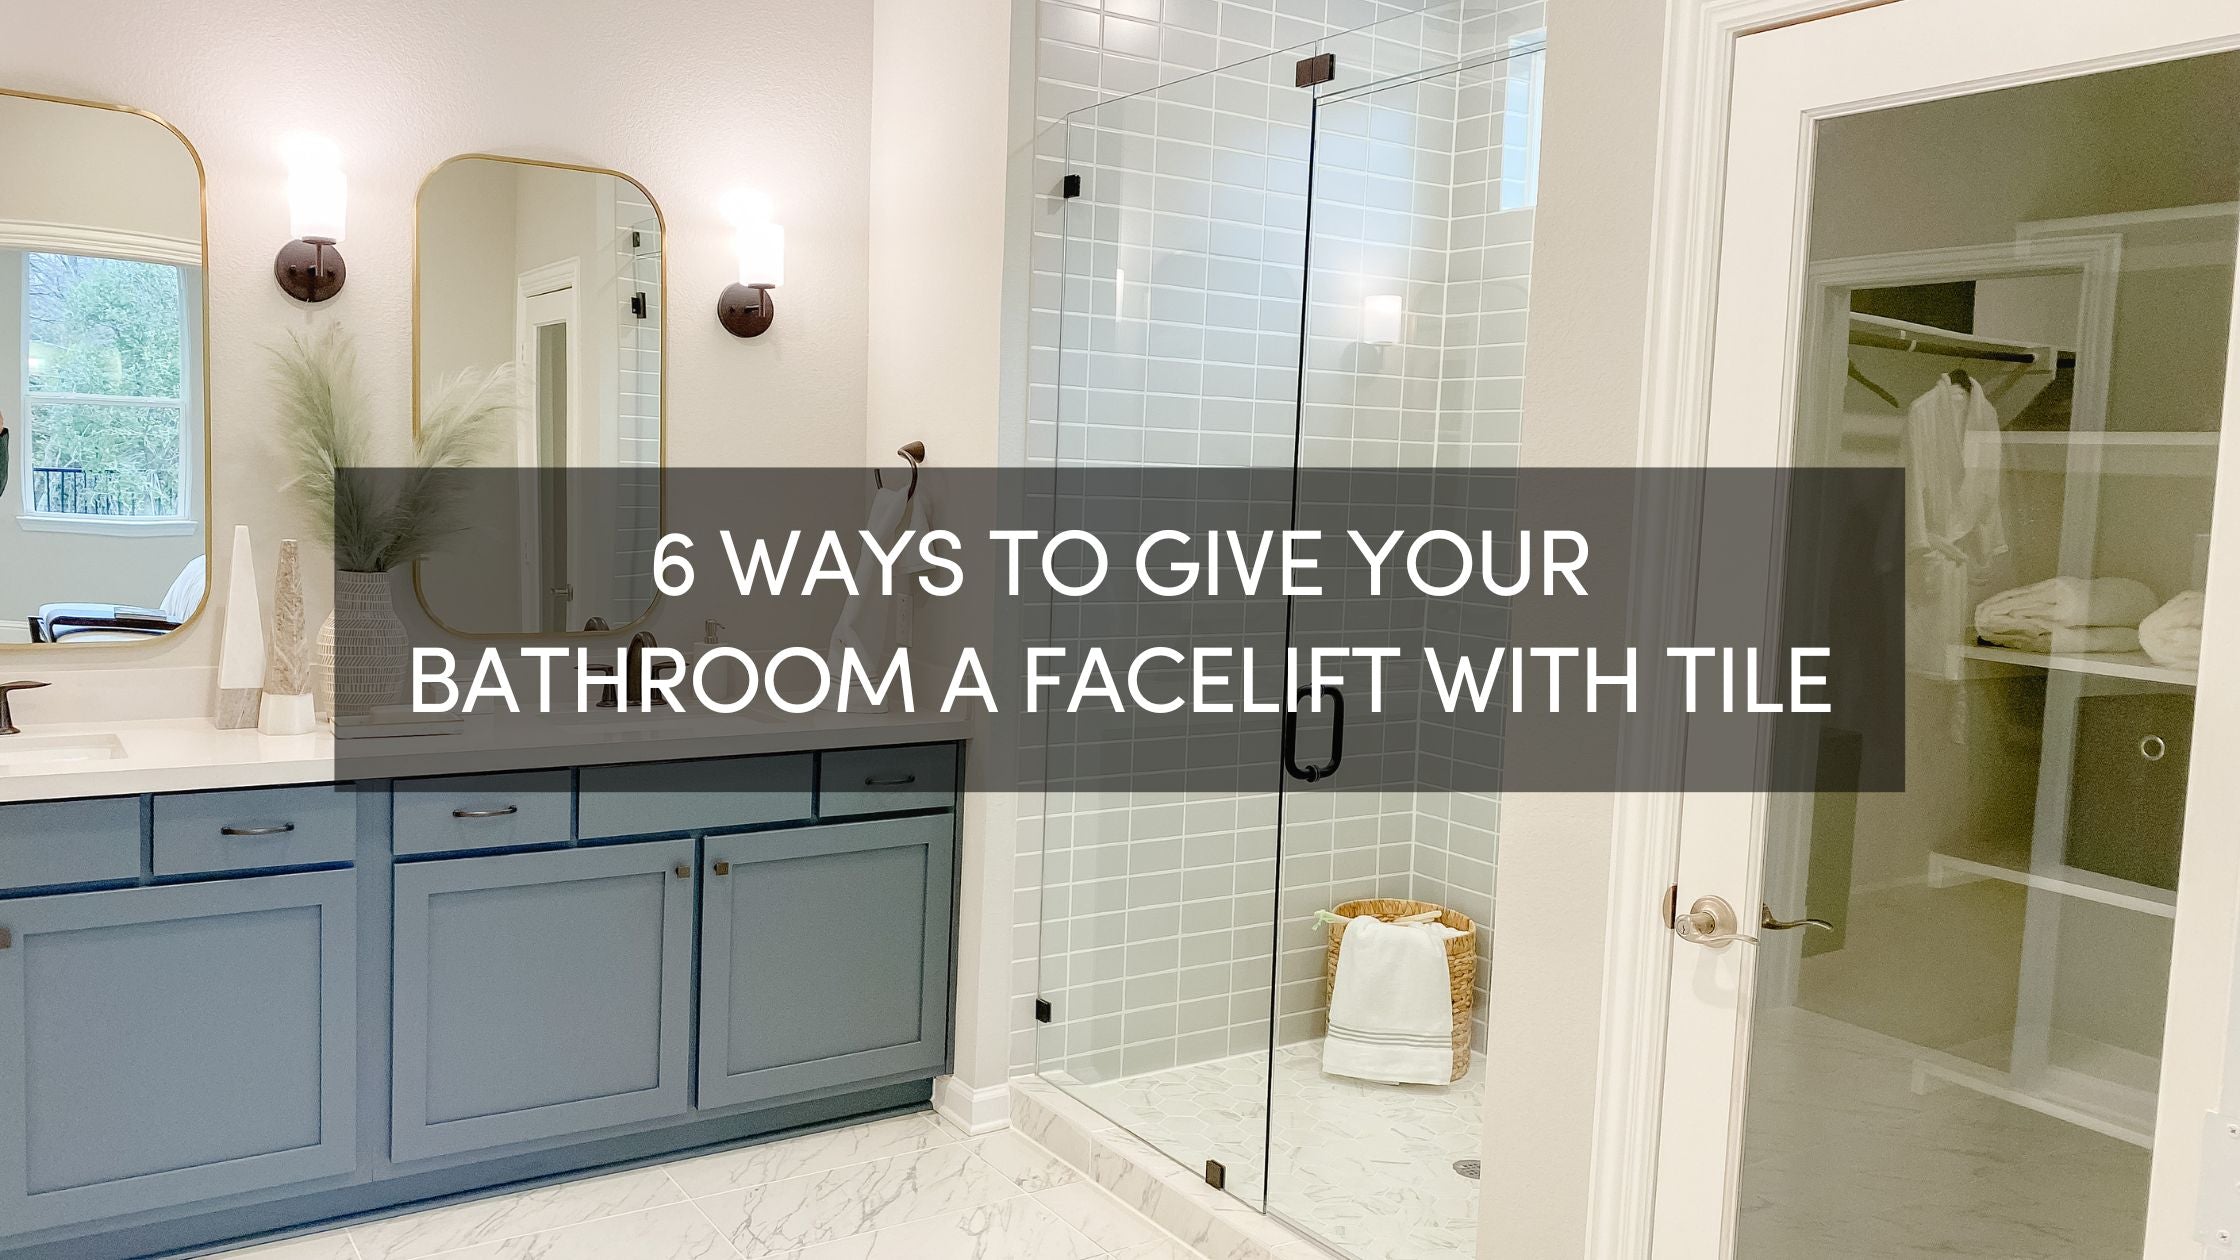 6 Ways To Give Your Bathroom a Facelift with Tile – AquaBlu Mosaics